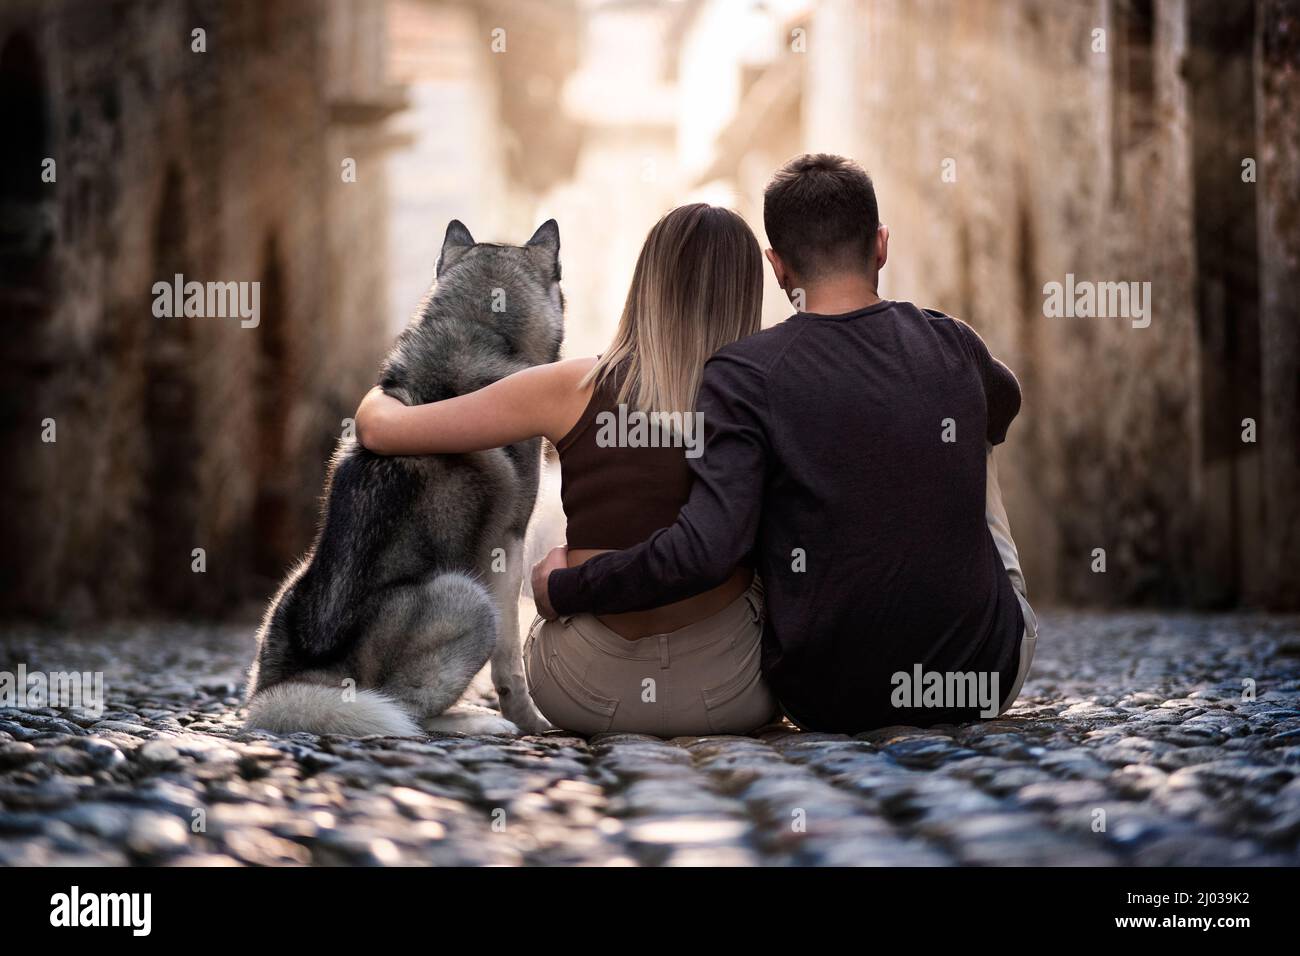 Back view of two young people and their beloved wolf dog sitting and hugging in an old town street staring at the sun, Piemonte, Italy, Europe Stock Photo